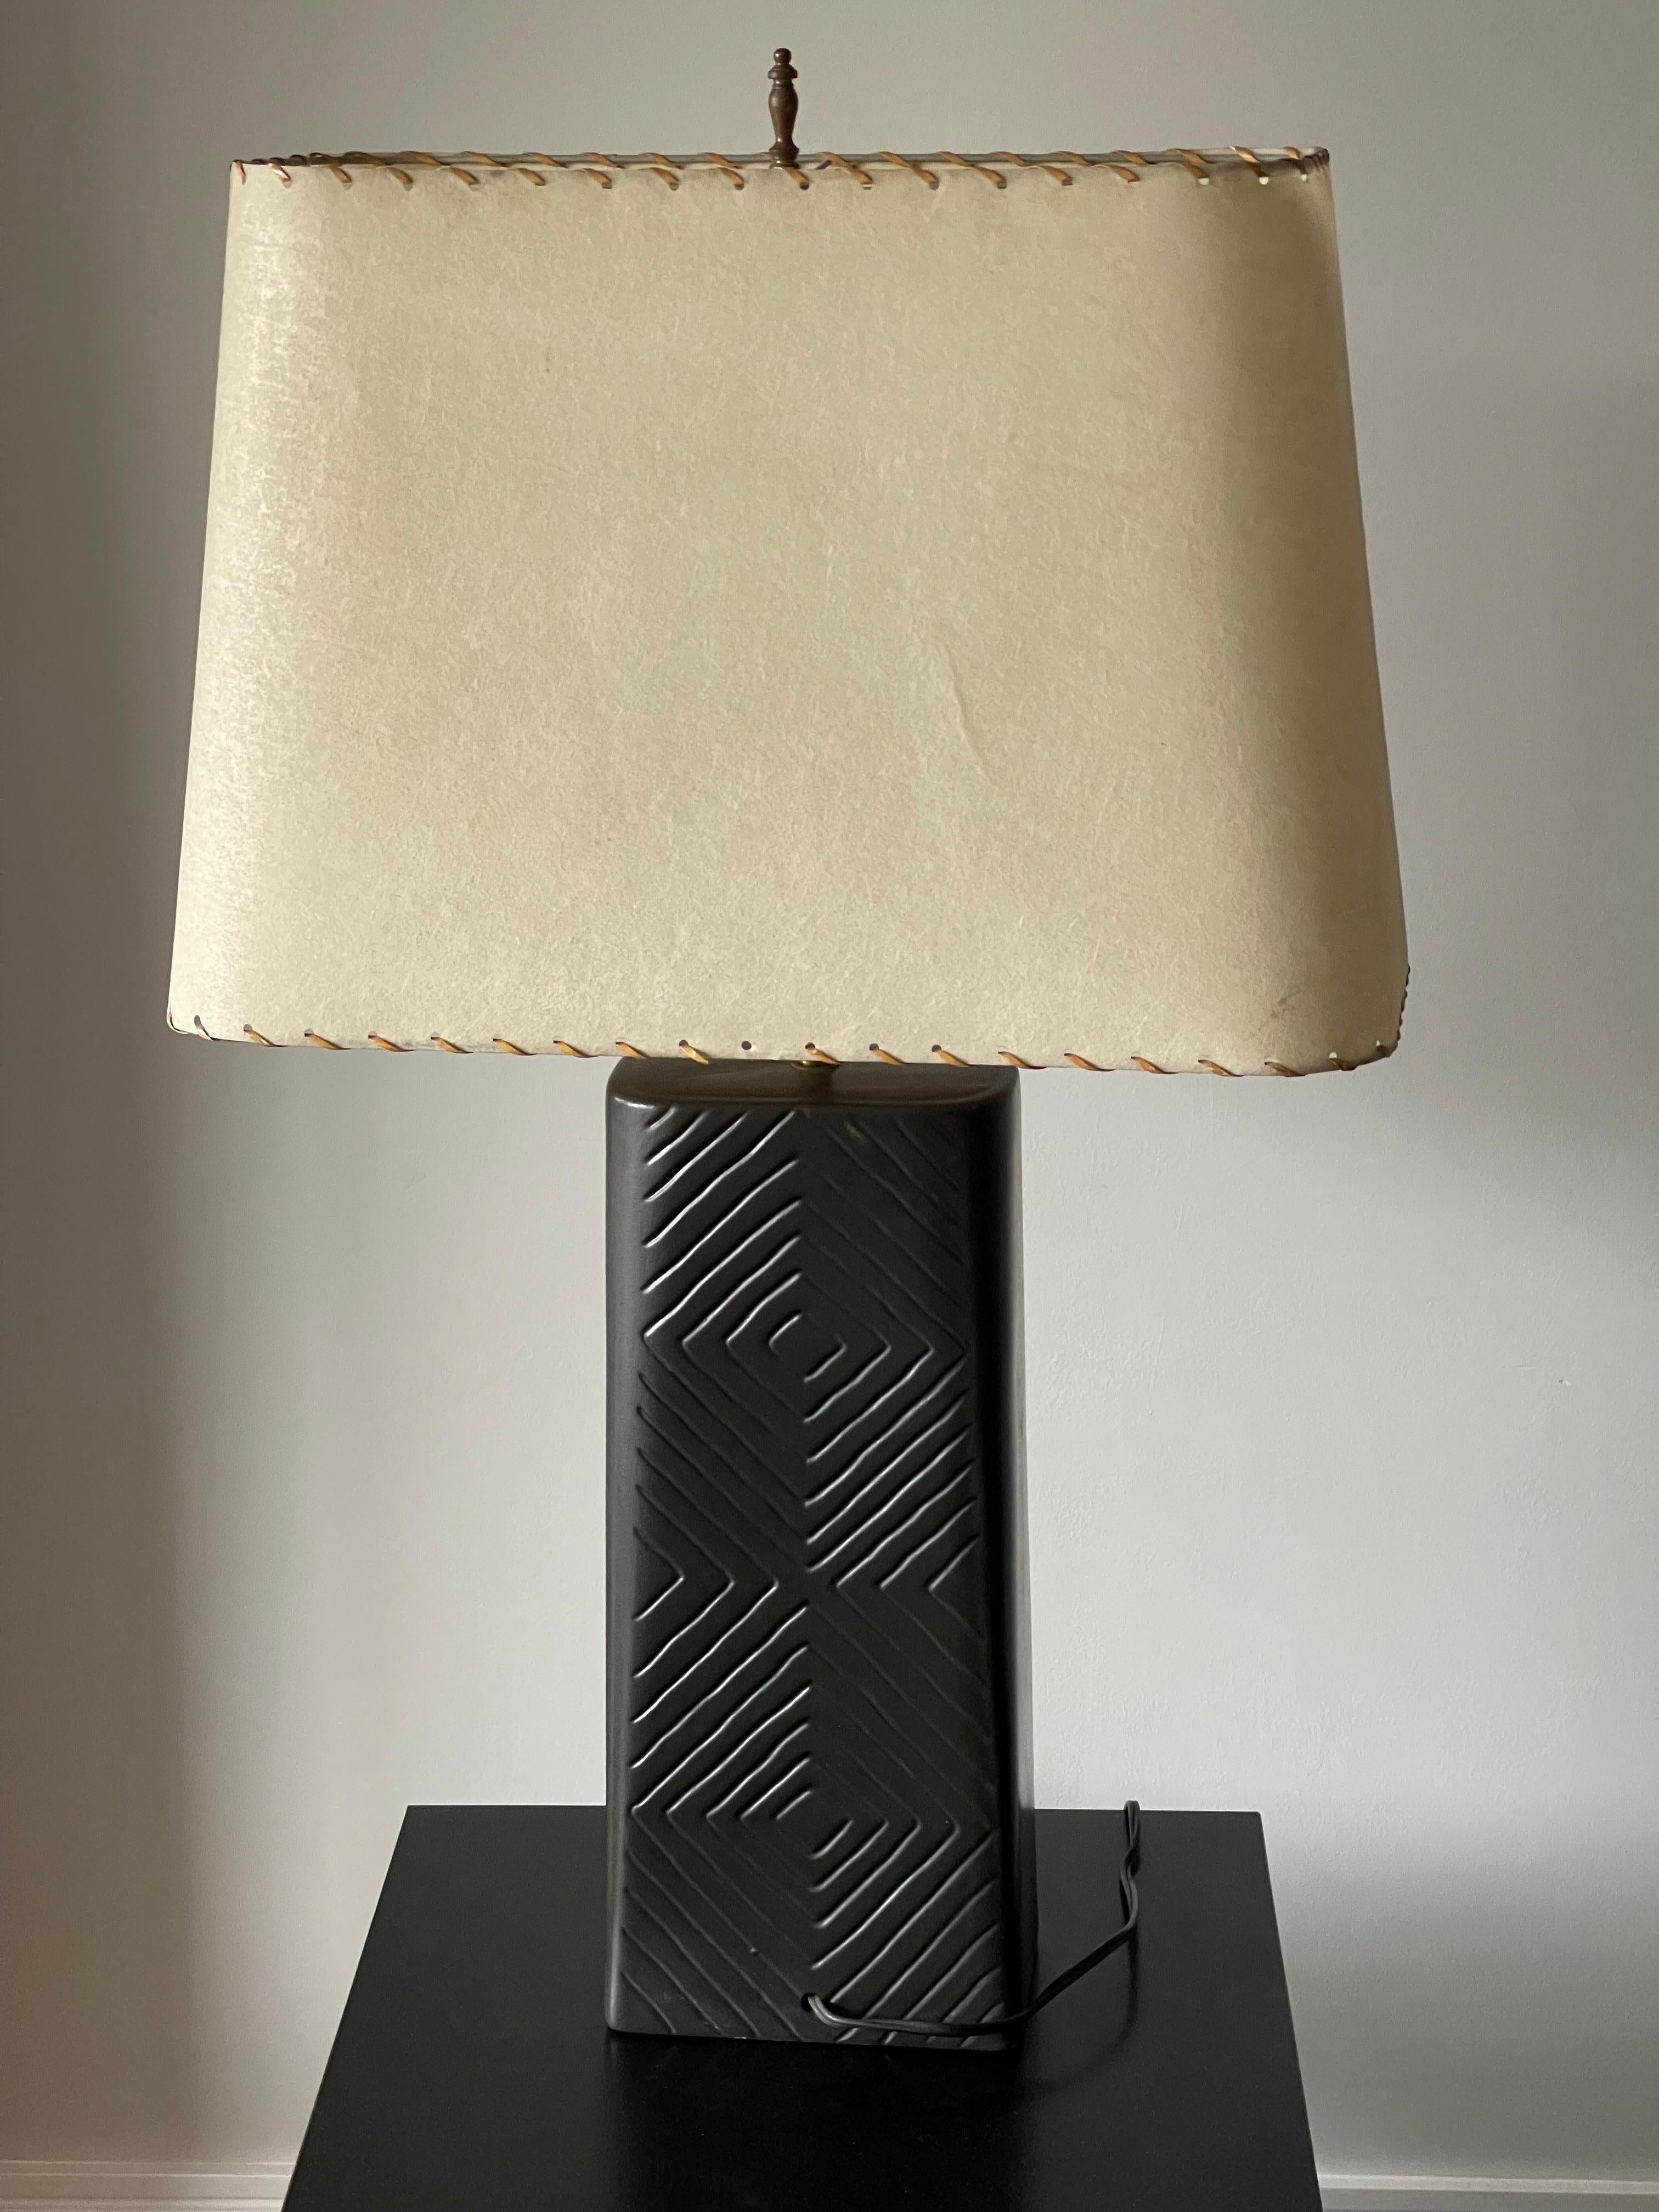 Large Mid-Century Modern Ceramic Table Lamp with Original Shade  For Sale 5